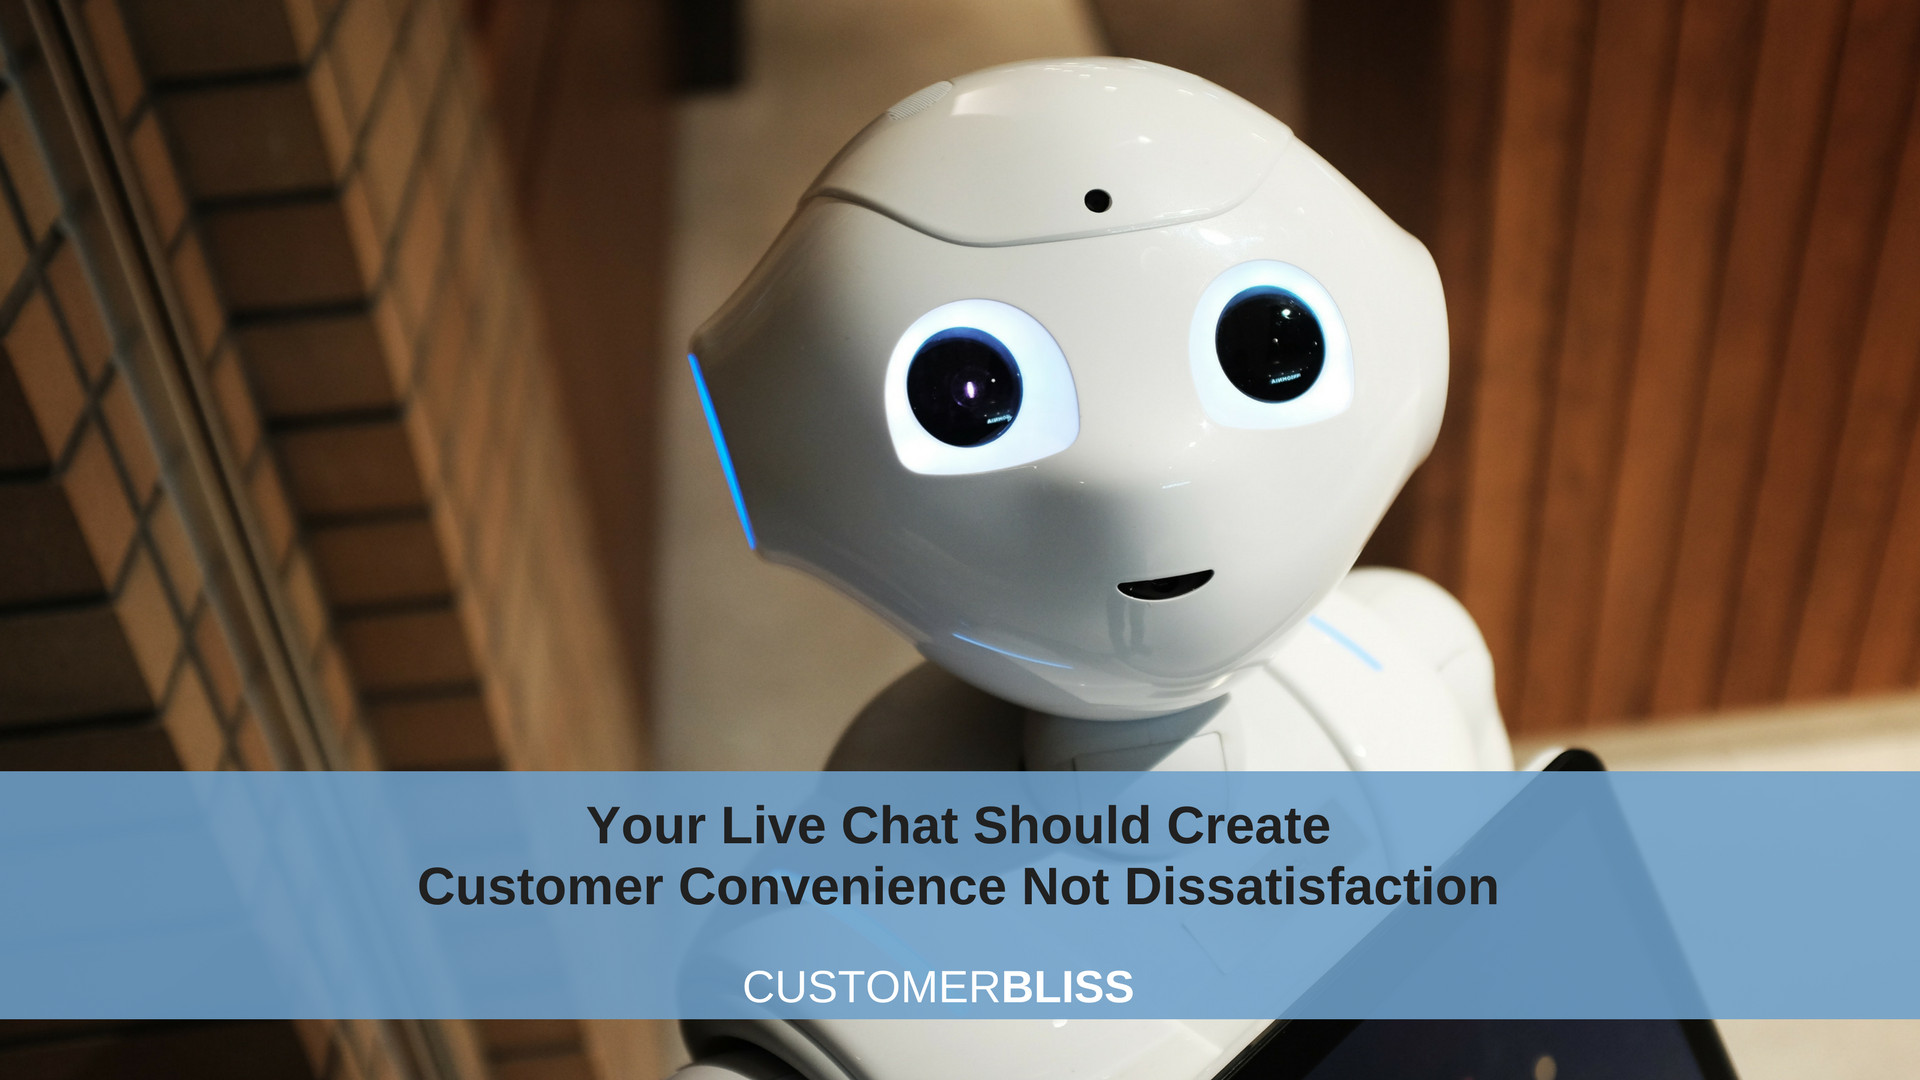 Live Chat Should Create Customer Convenience Not Dissatisfaction